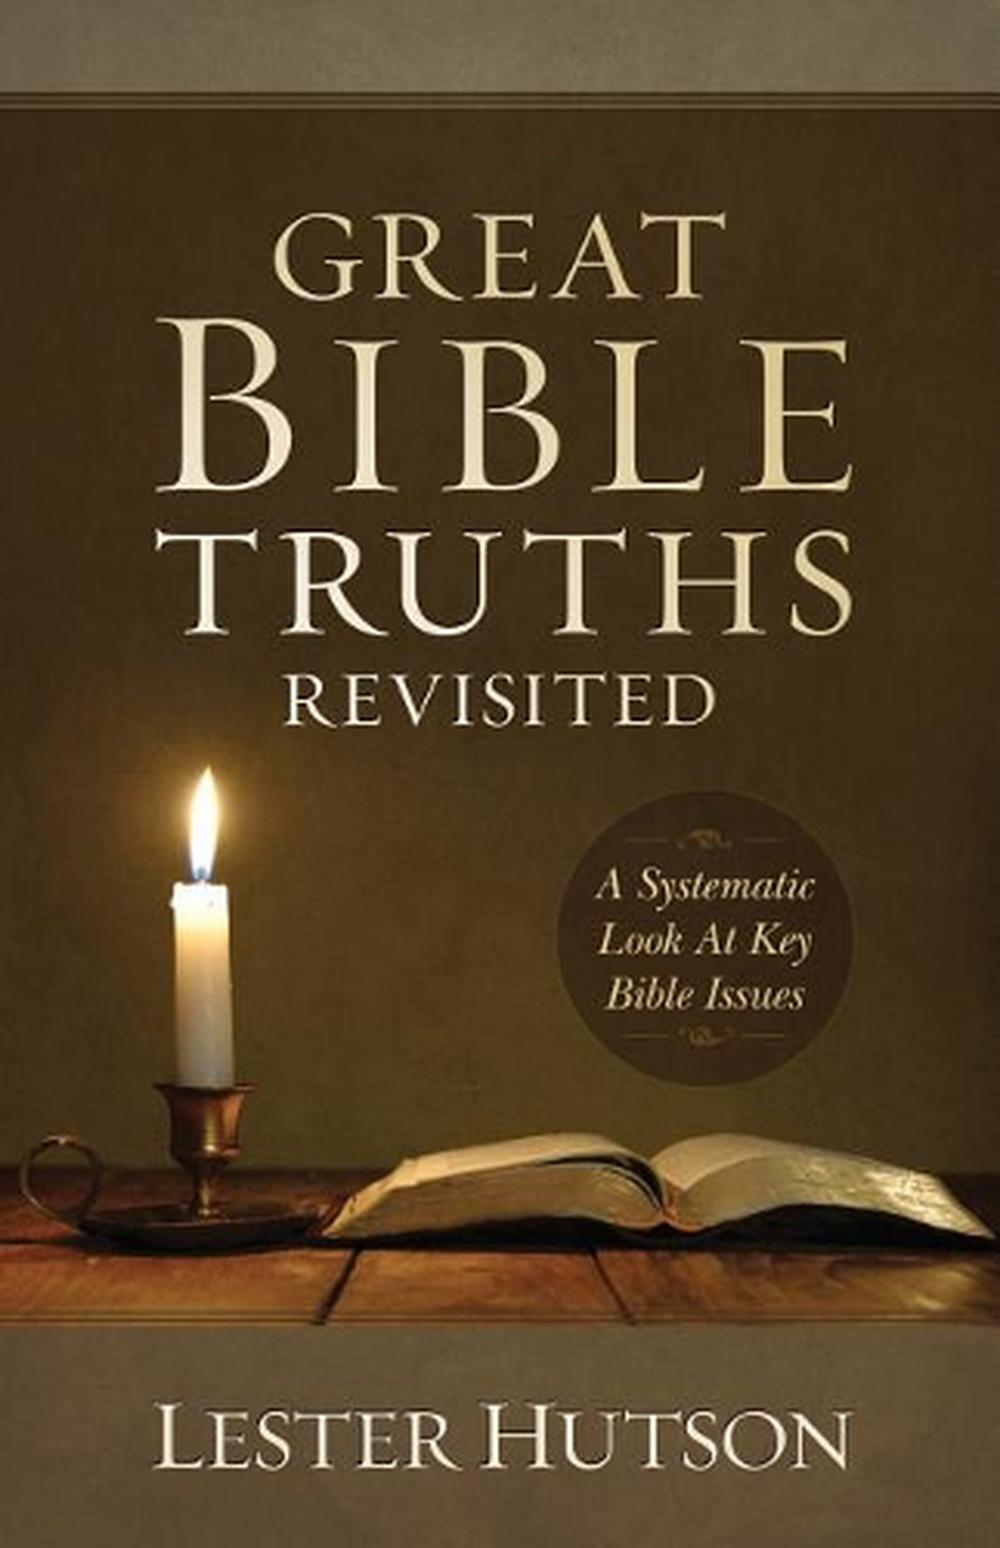 Great Bible Truths Revisited By Lester Hutson English Paperback Book